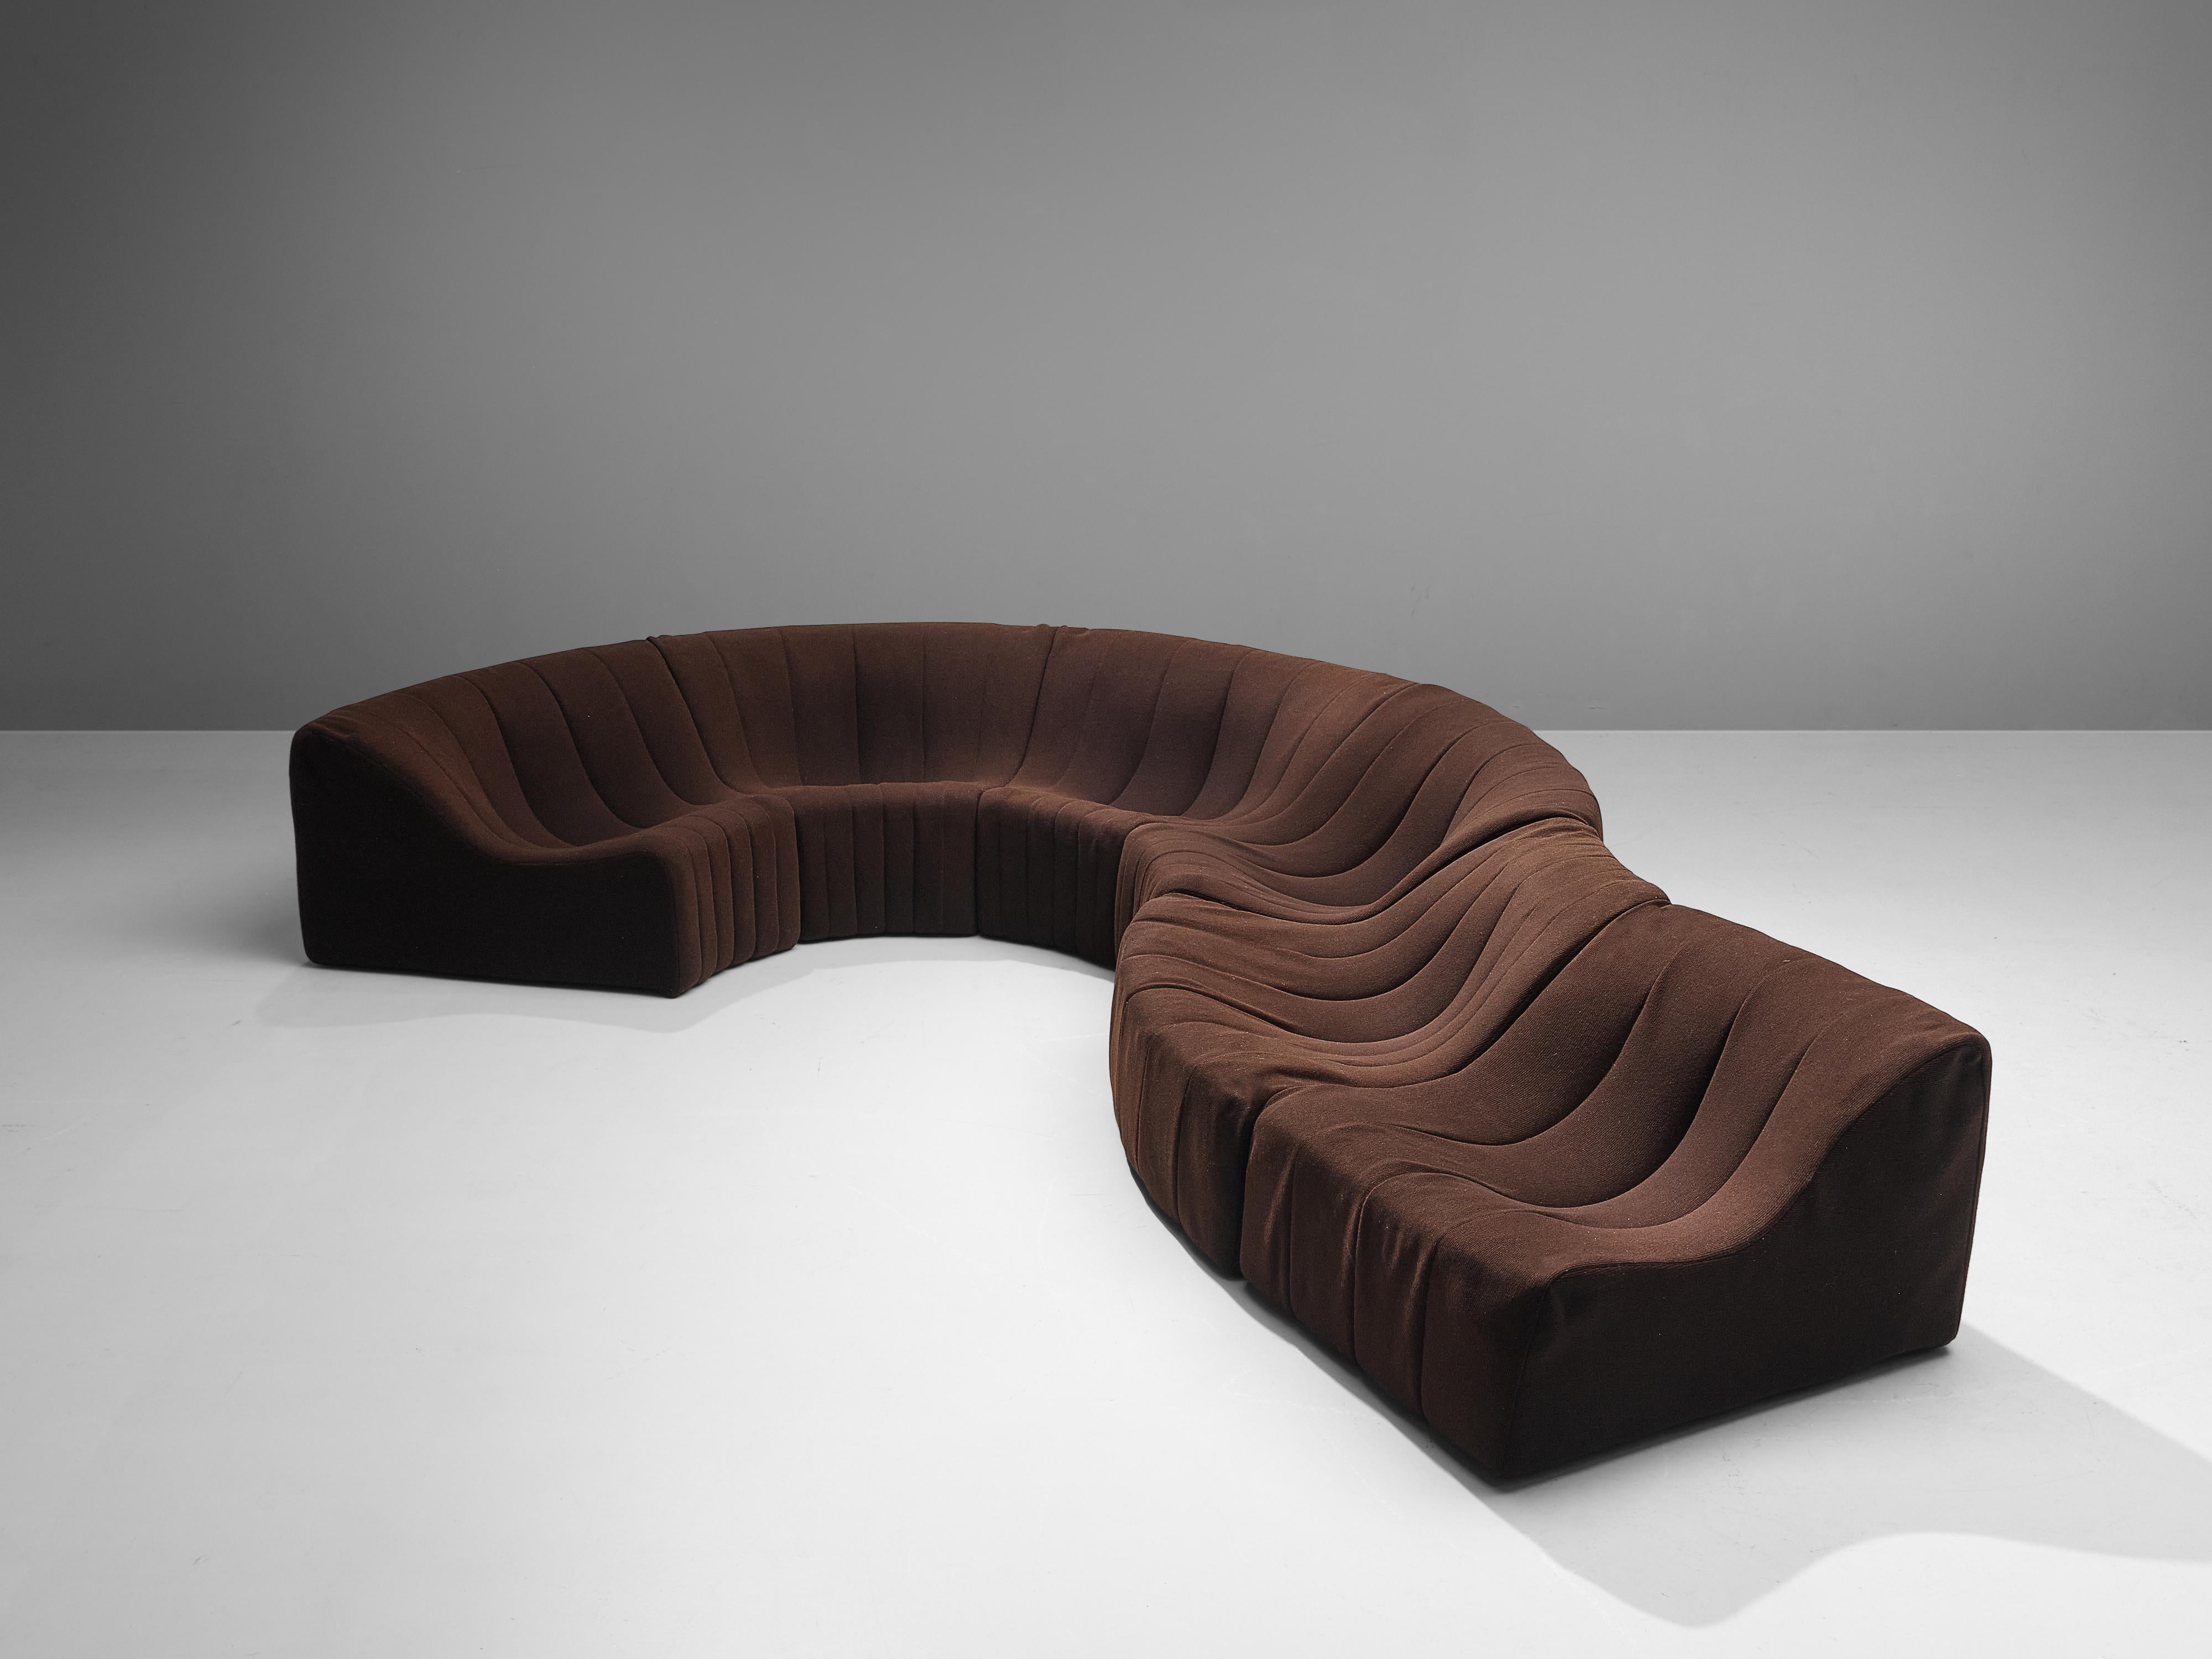 Kwok Hoi Chan for Steiner´Chromatic´ Modular Sofa in Brown Upholstery 3